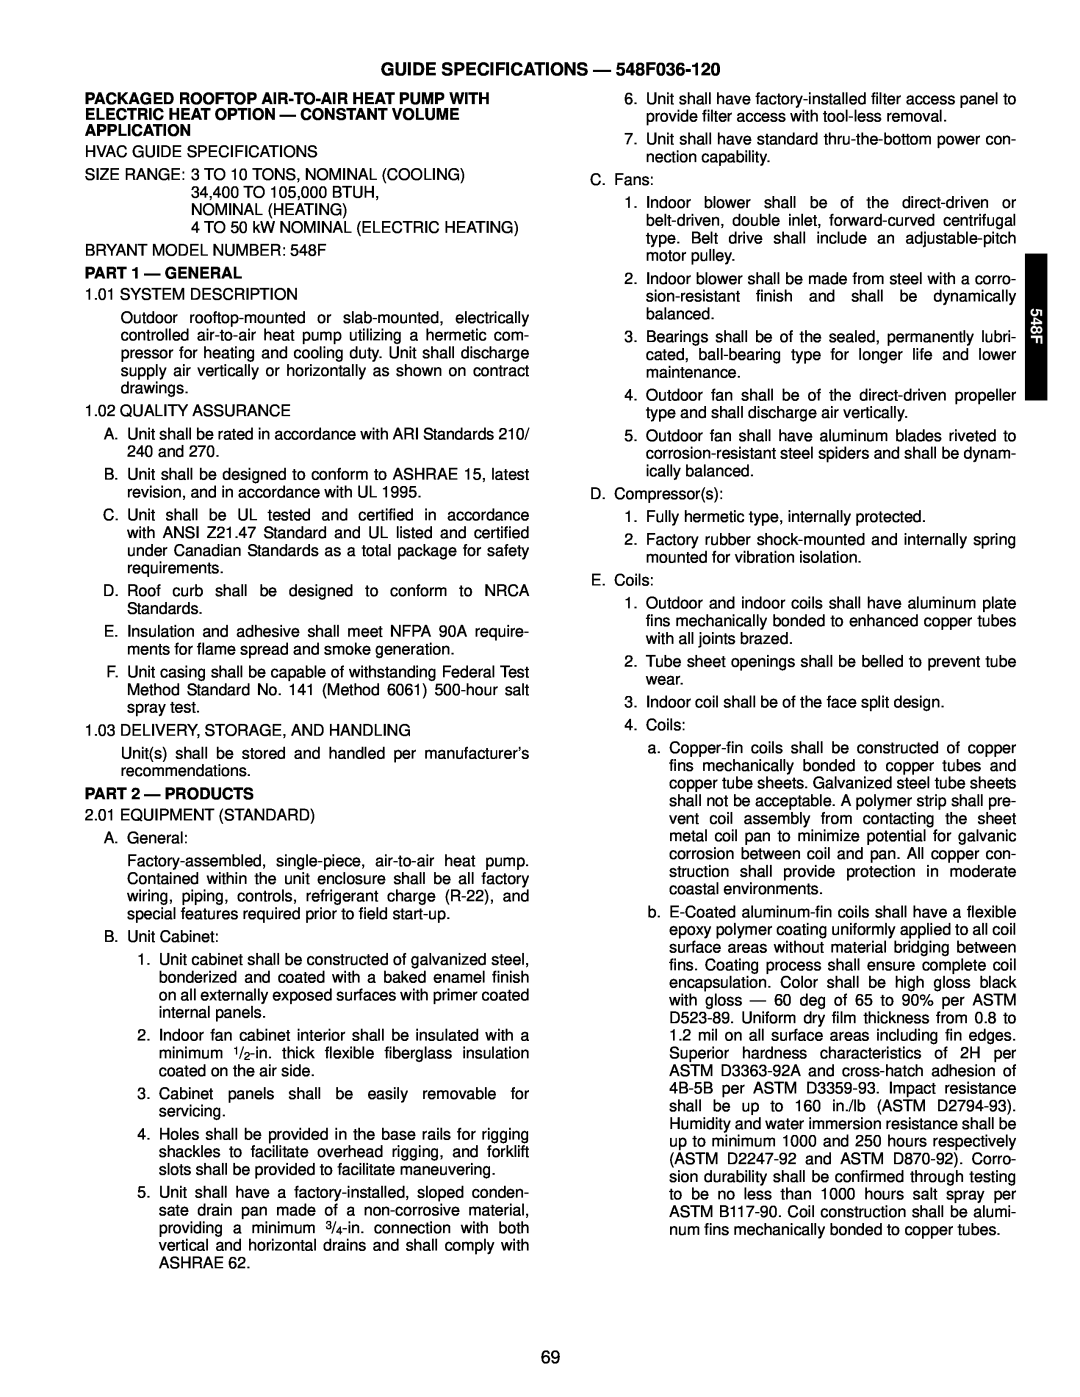 Bryant 549C manual GUIDE SPECIFICATIONS — 548F036-120, PART 1 — GENERAL, PART 2 - PRODUCTS 